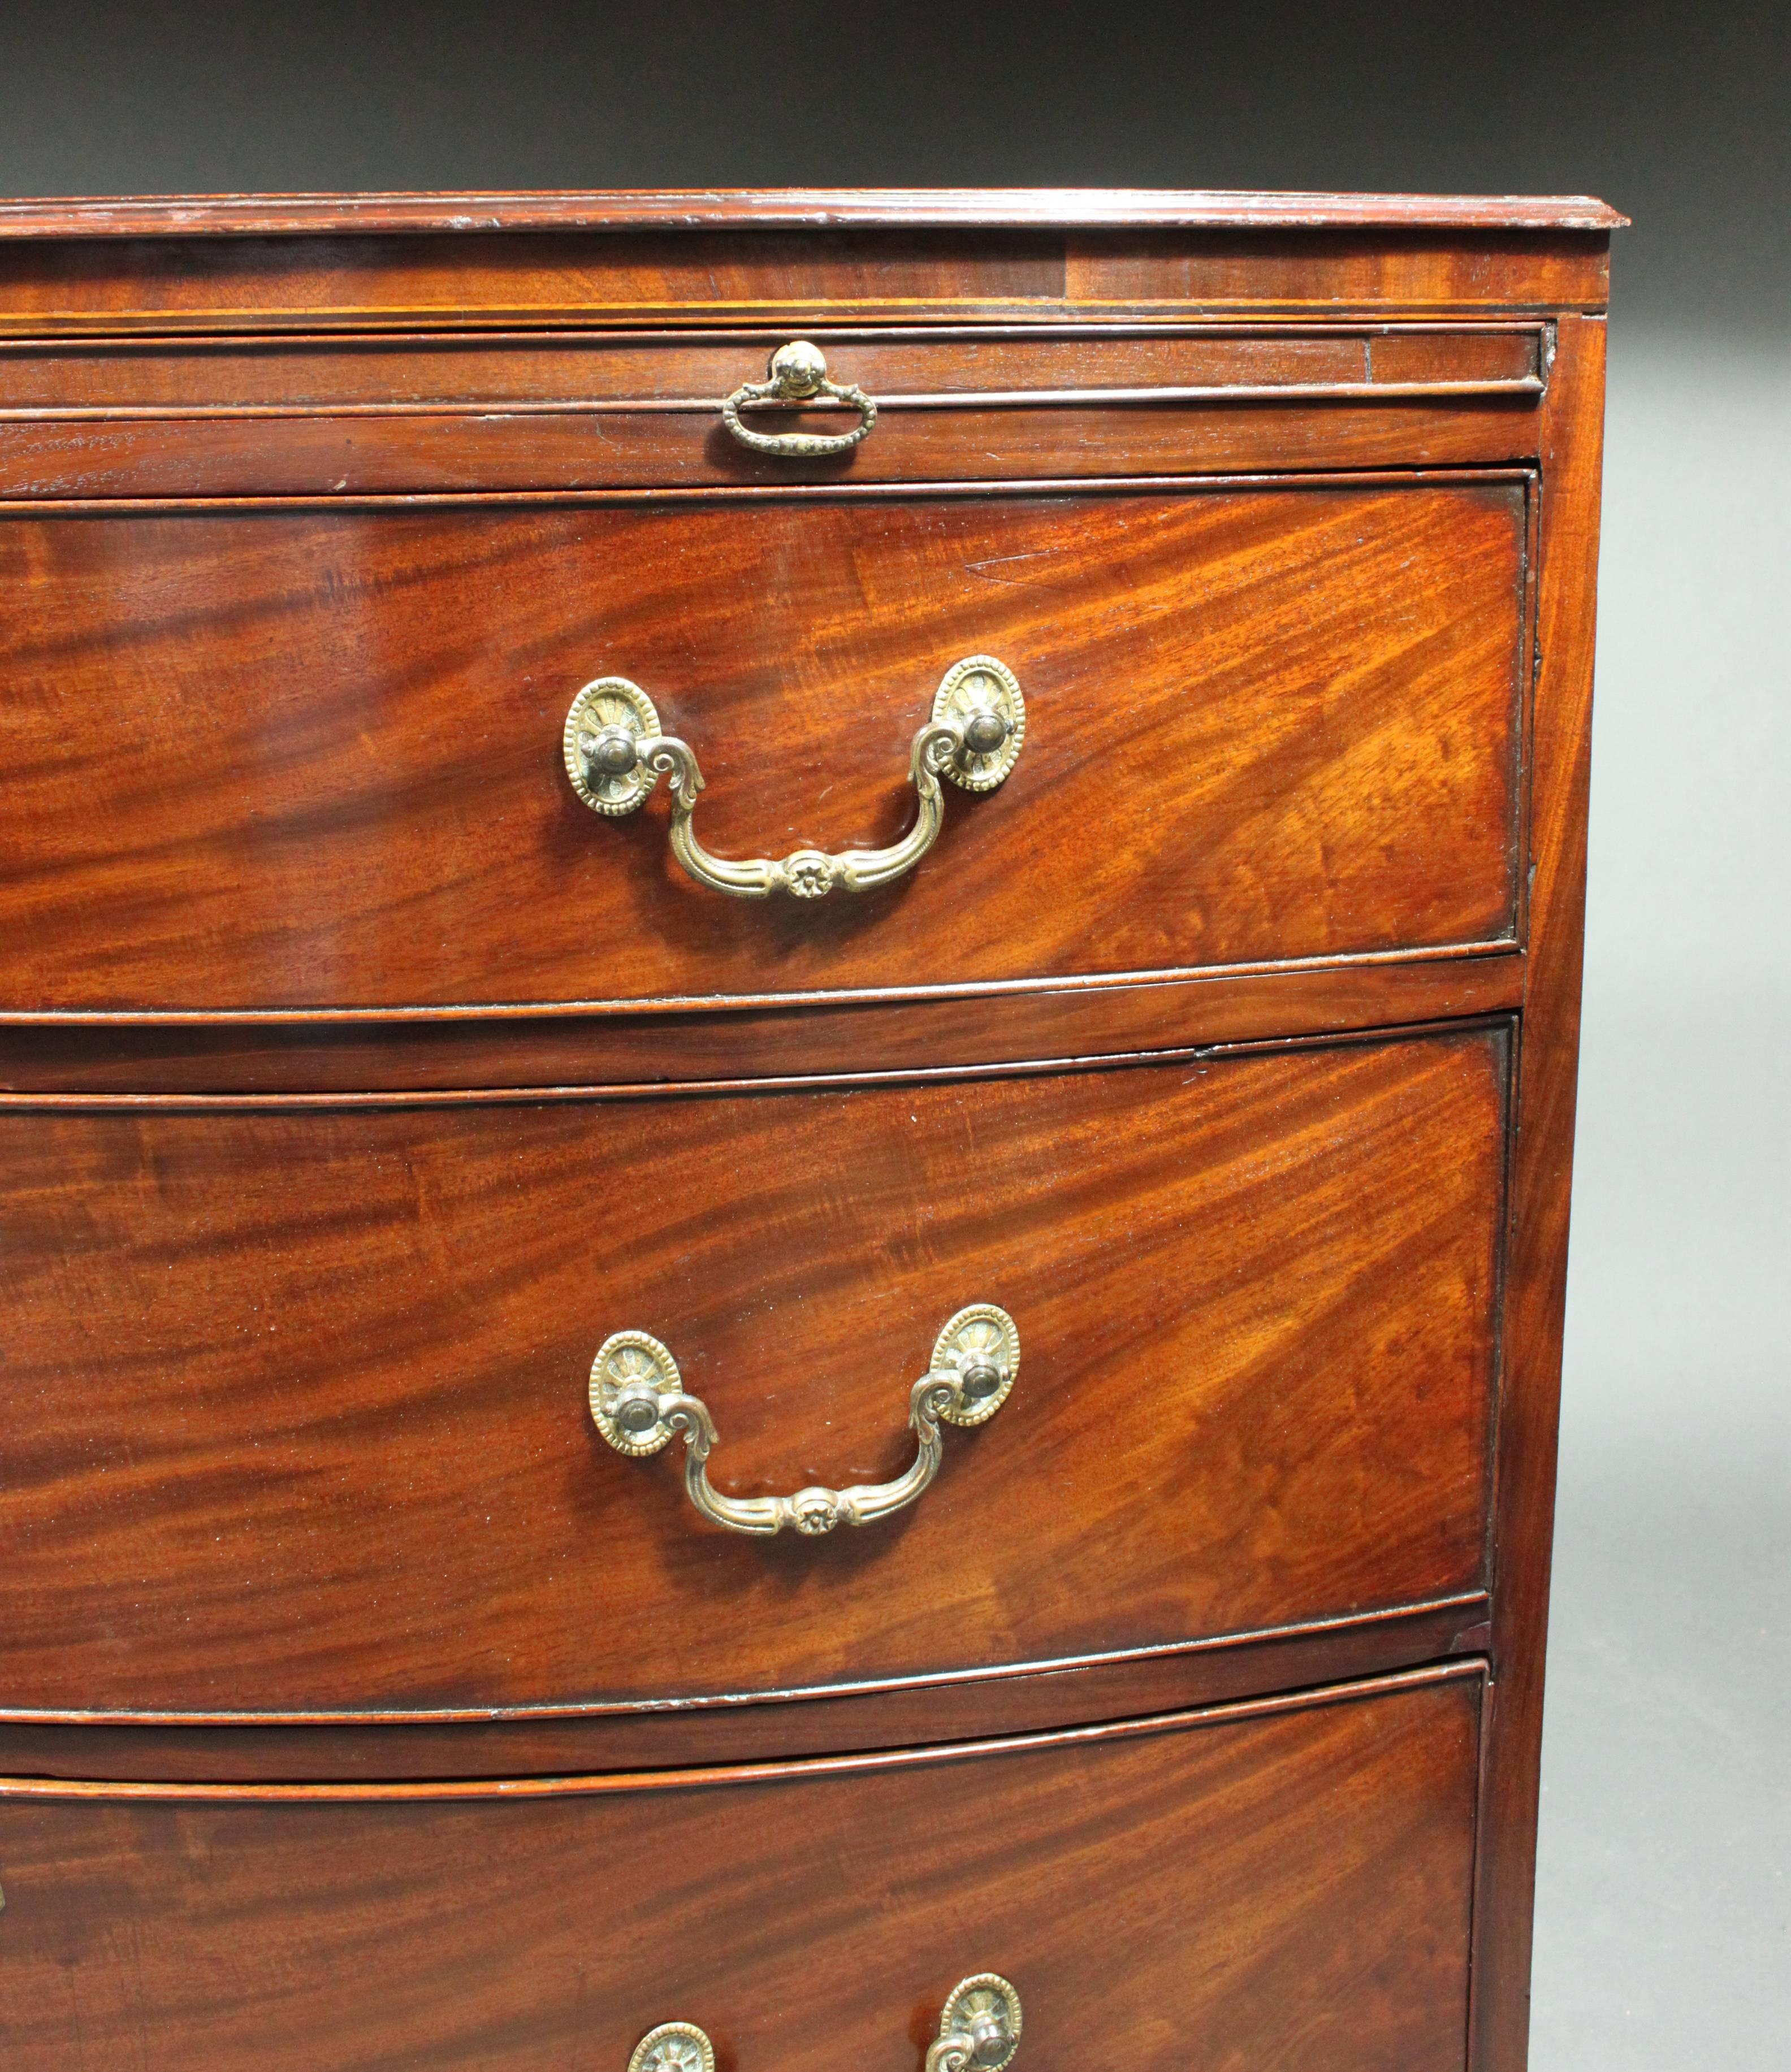 A fine George III bow-front chest in figured mahogany with box wood and ebony stringing; original cast swan-neck handles still retaining some of their gilt; oak lined drawers and panelled back.